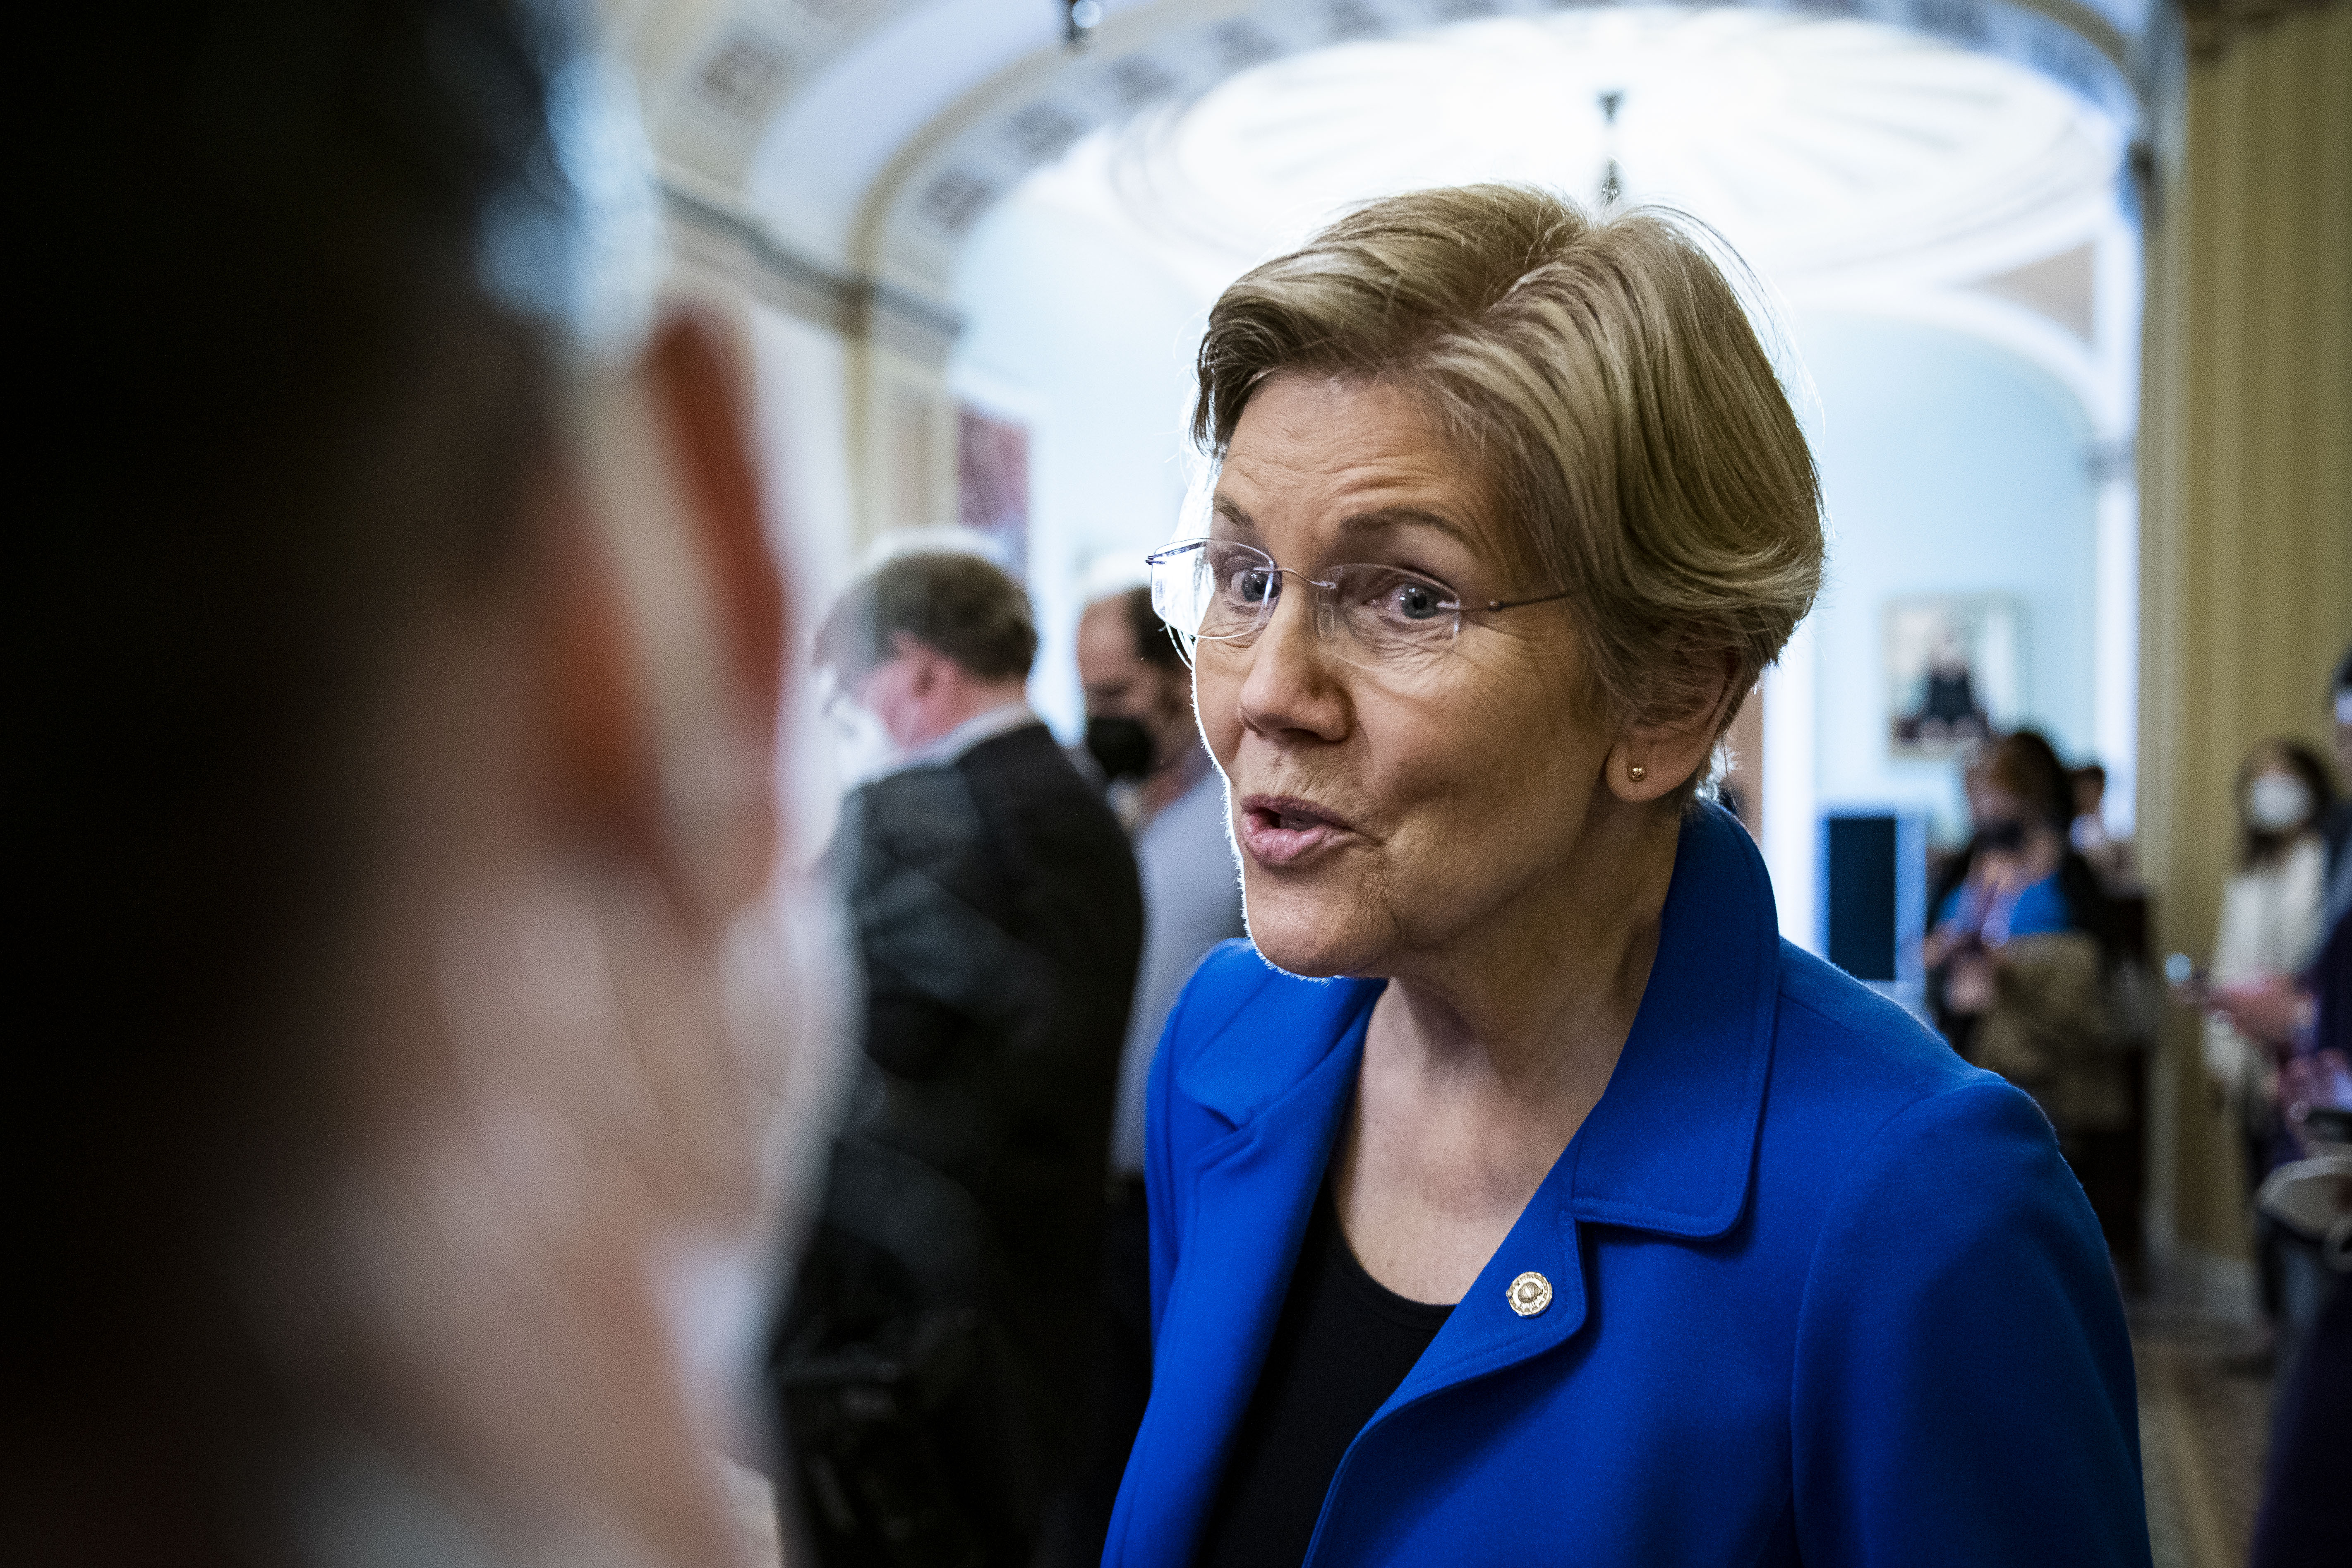 Warren warns Dems risk losing power without inflation action